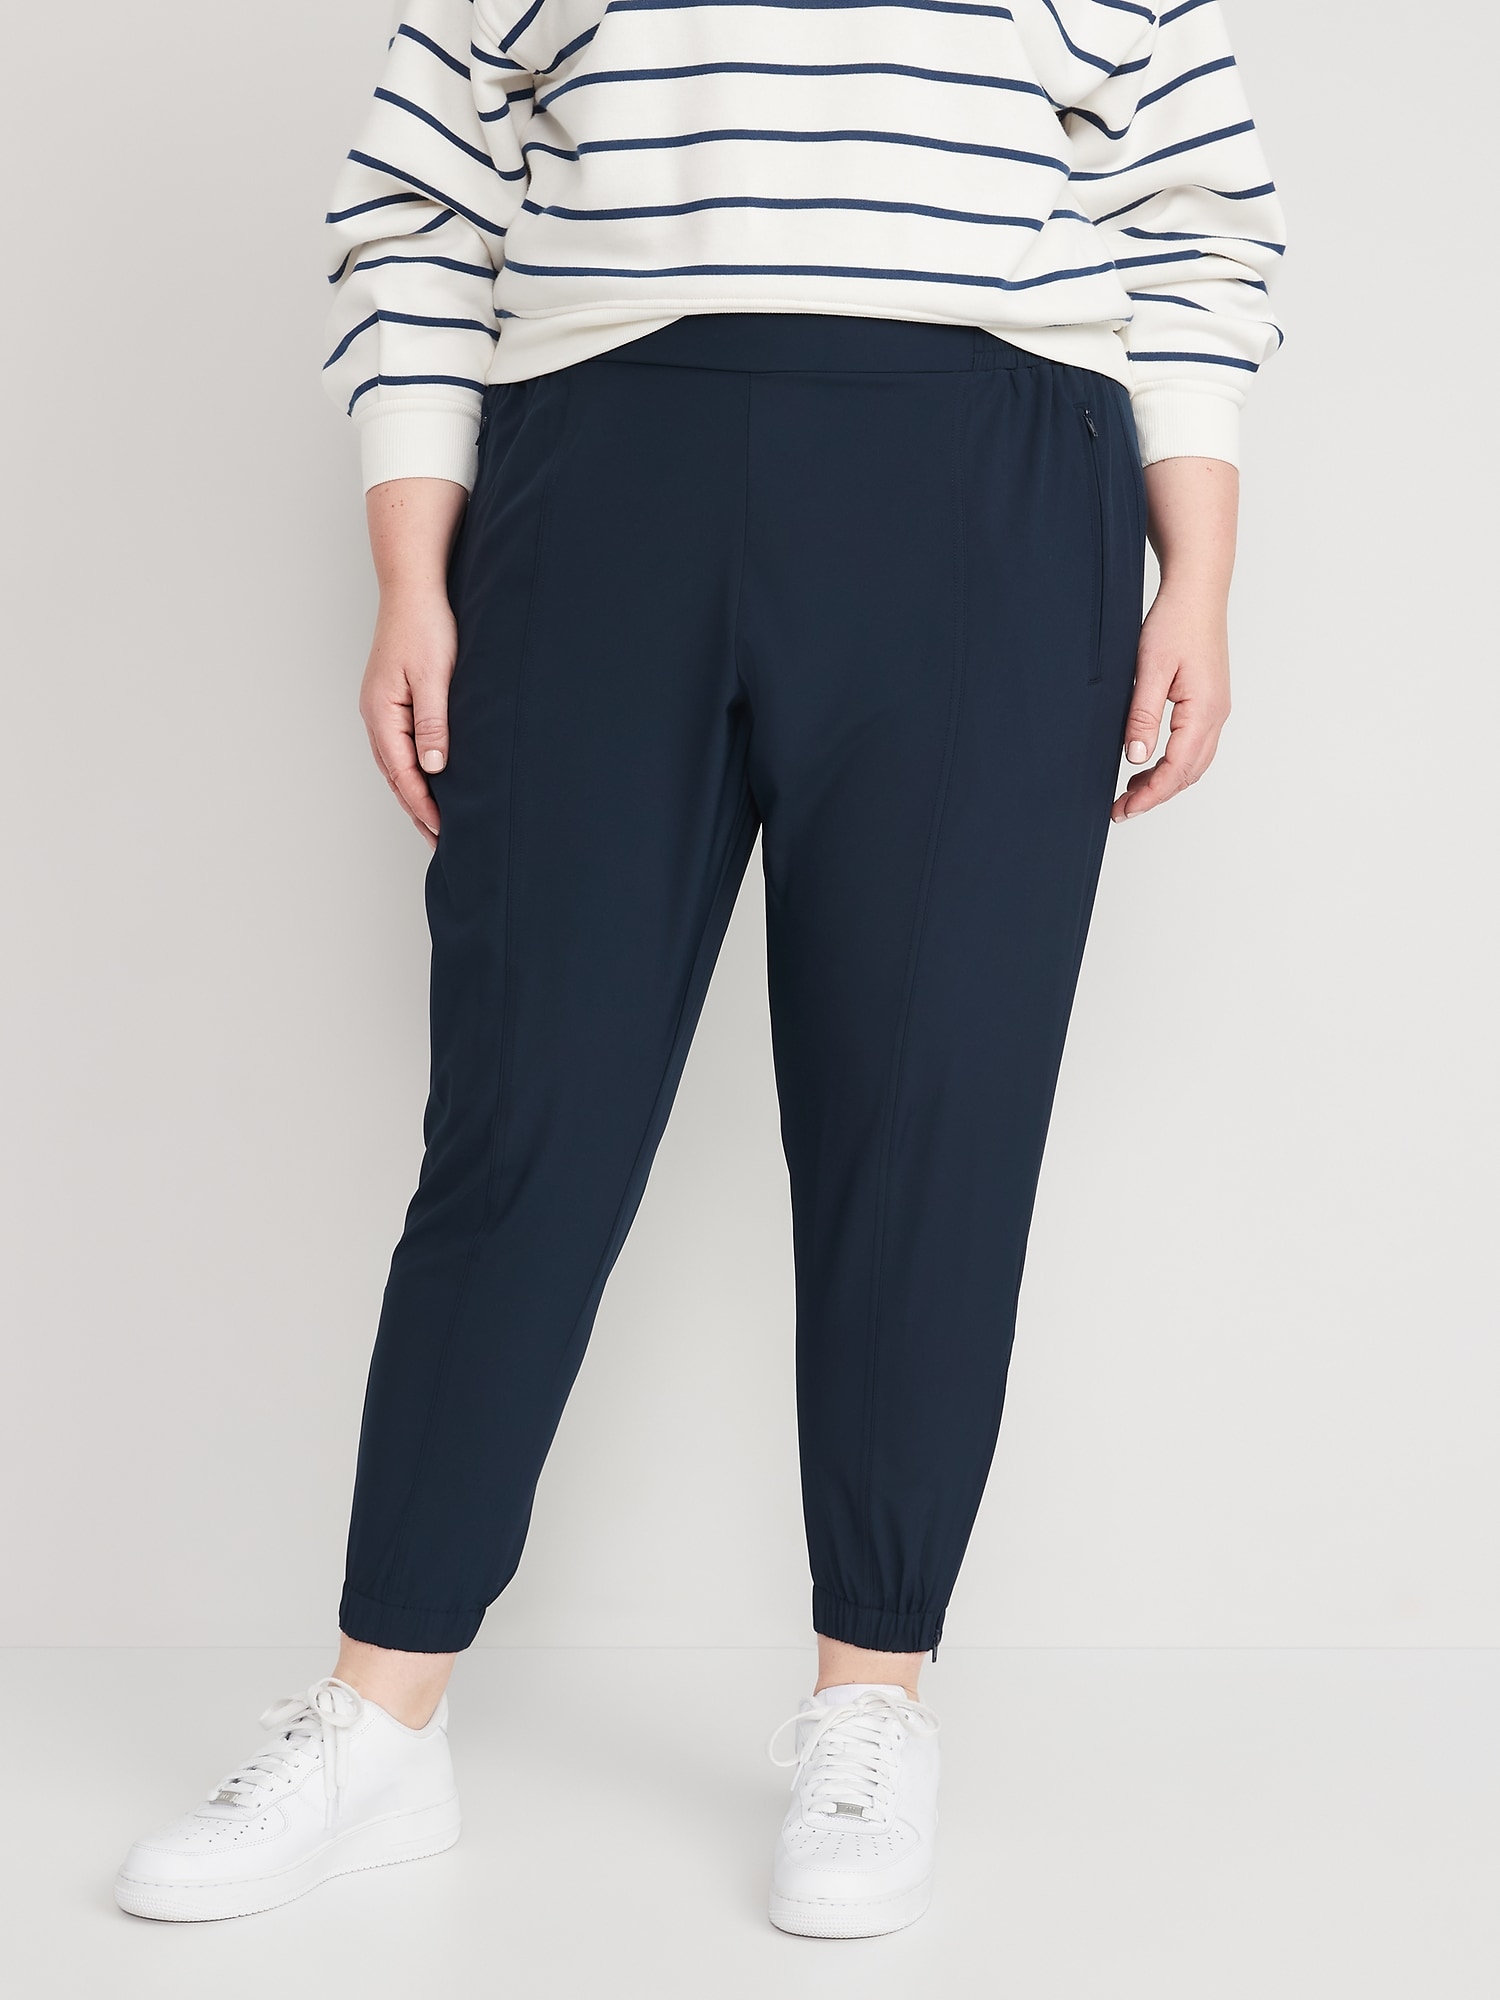 Extra HighWaisted LogoGraphic Ankle Jogger Sweatpants for Women  Old Navy